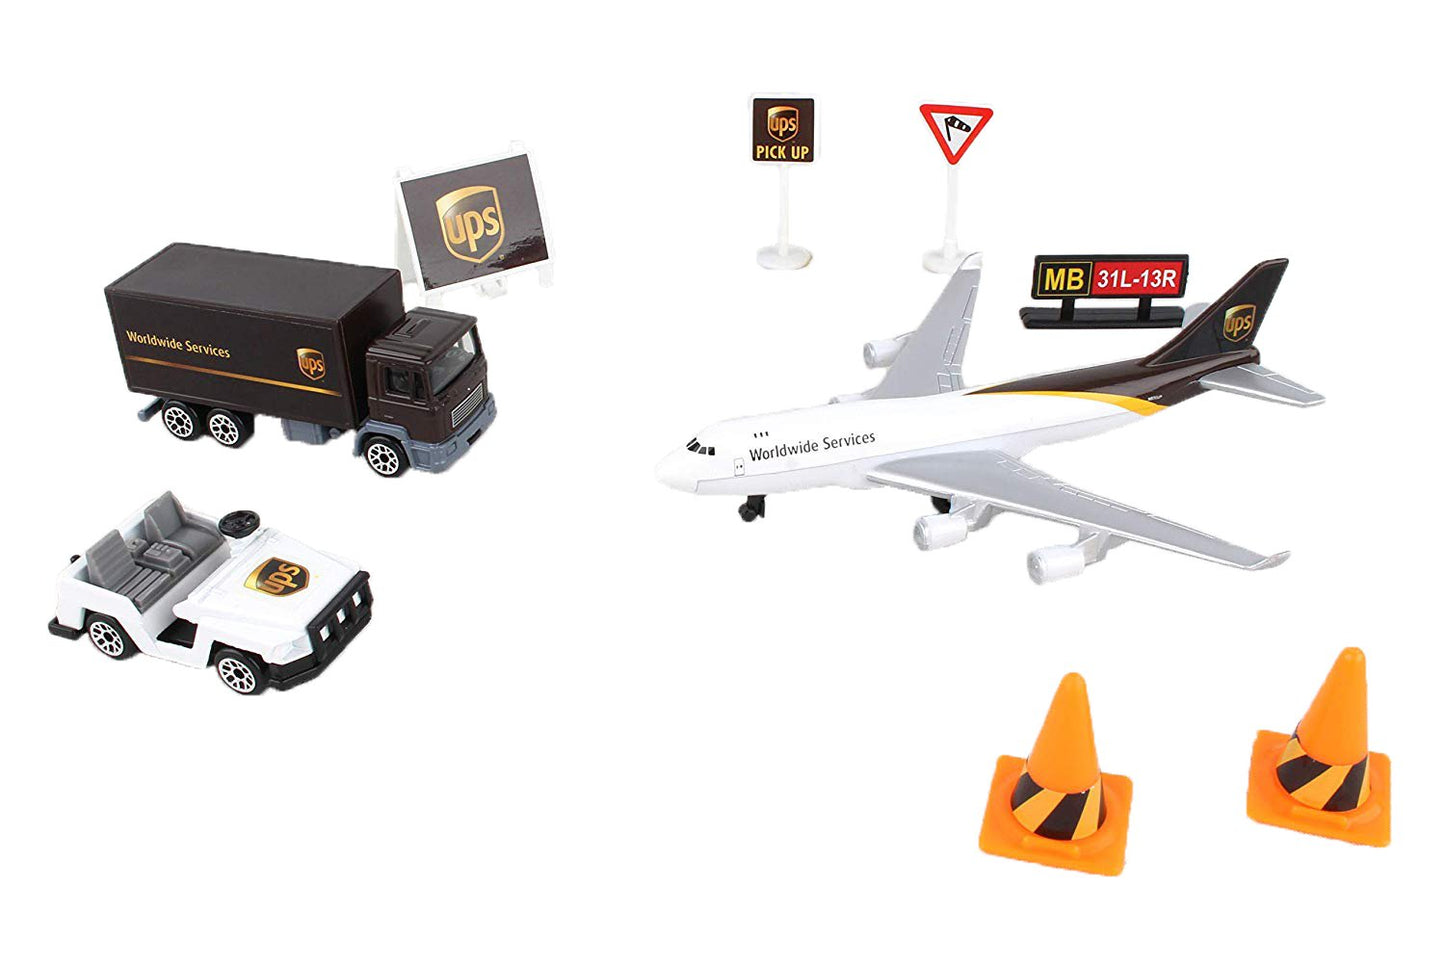 UPS Airport Die Cast Metal and Plastic Playset, Includes Thirteen Airport Essentials